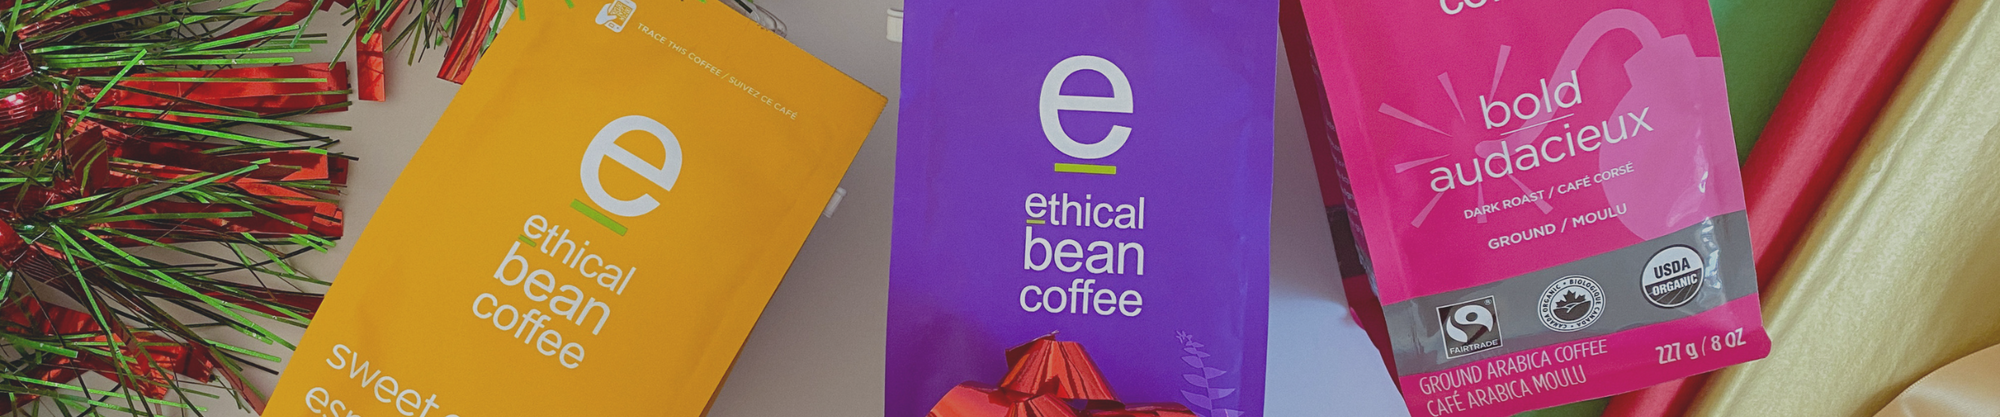 ethical bean coffee gifts collection